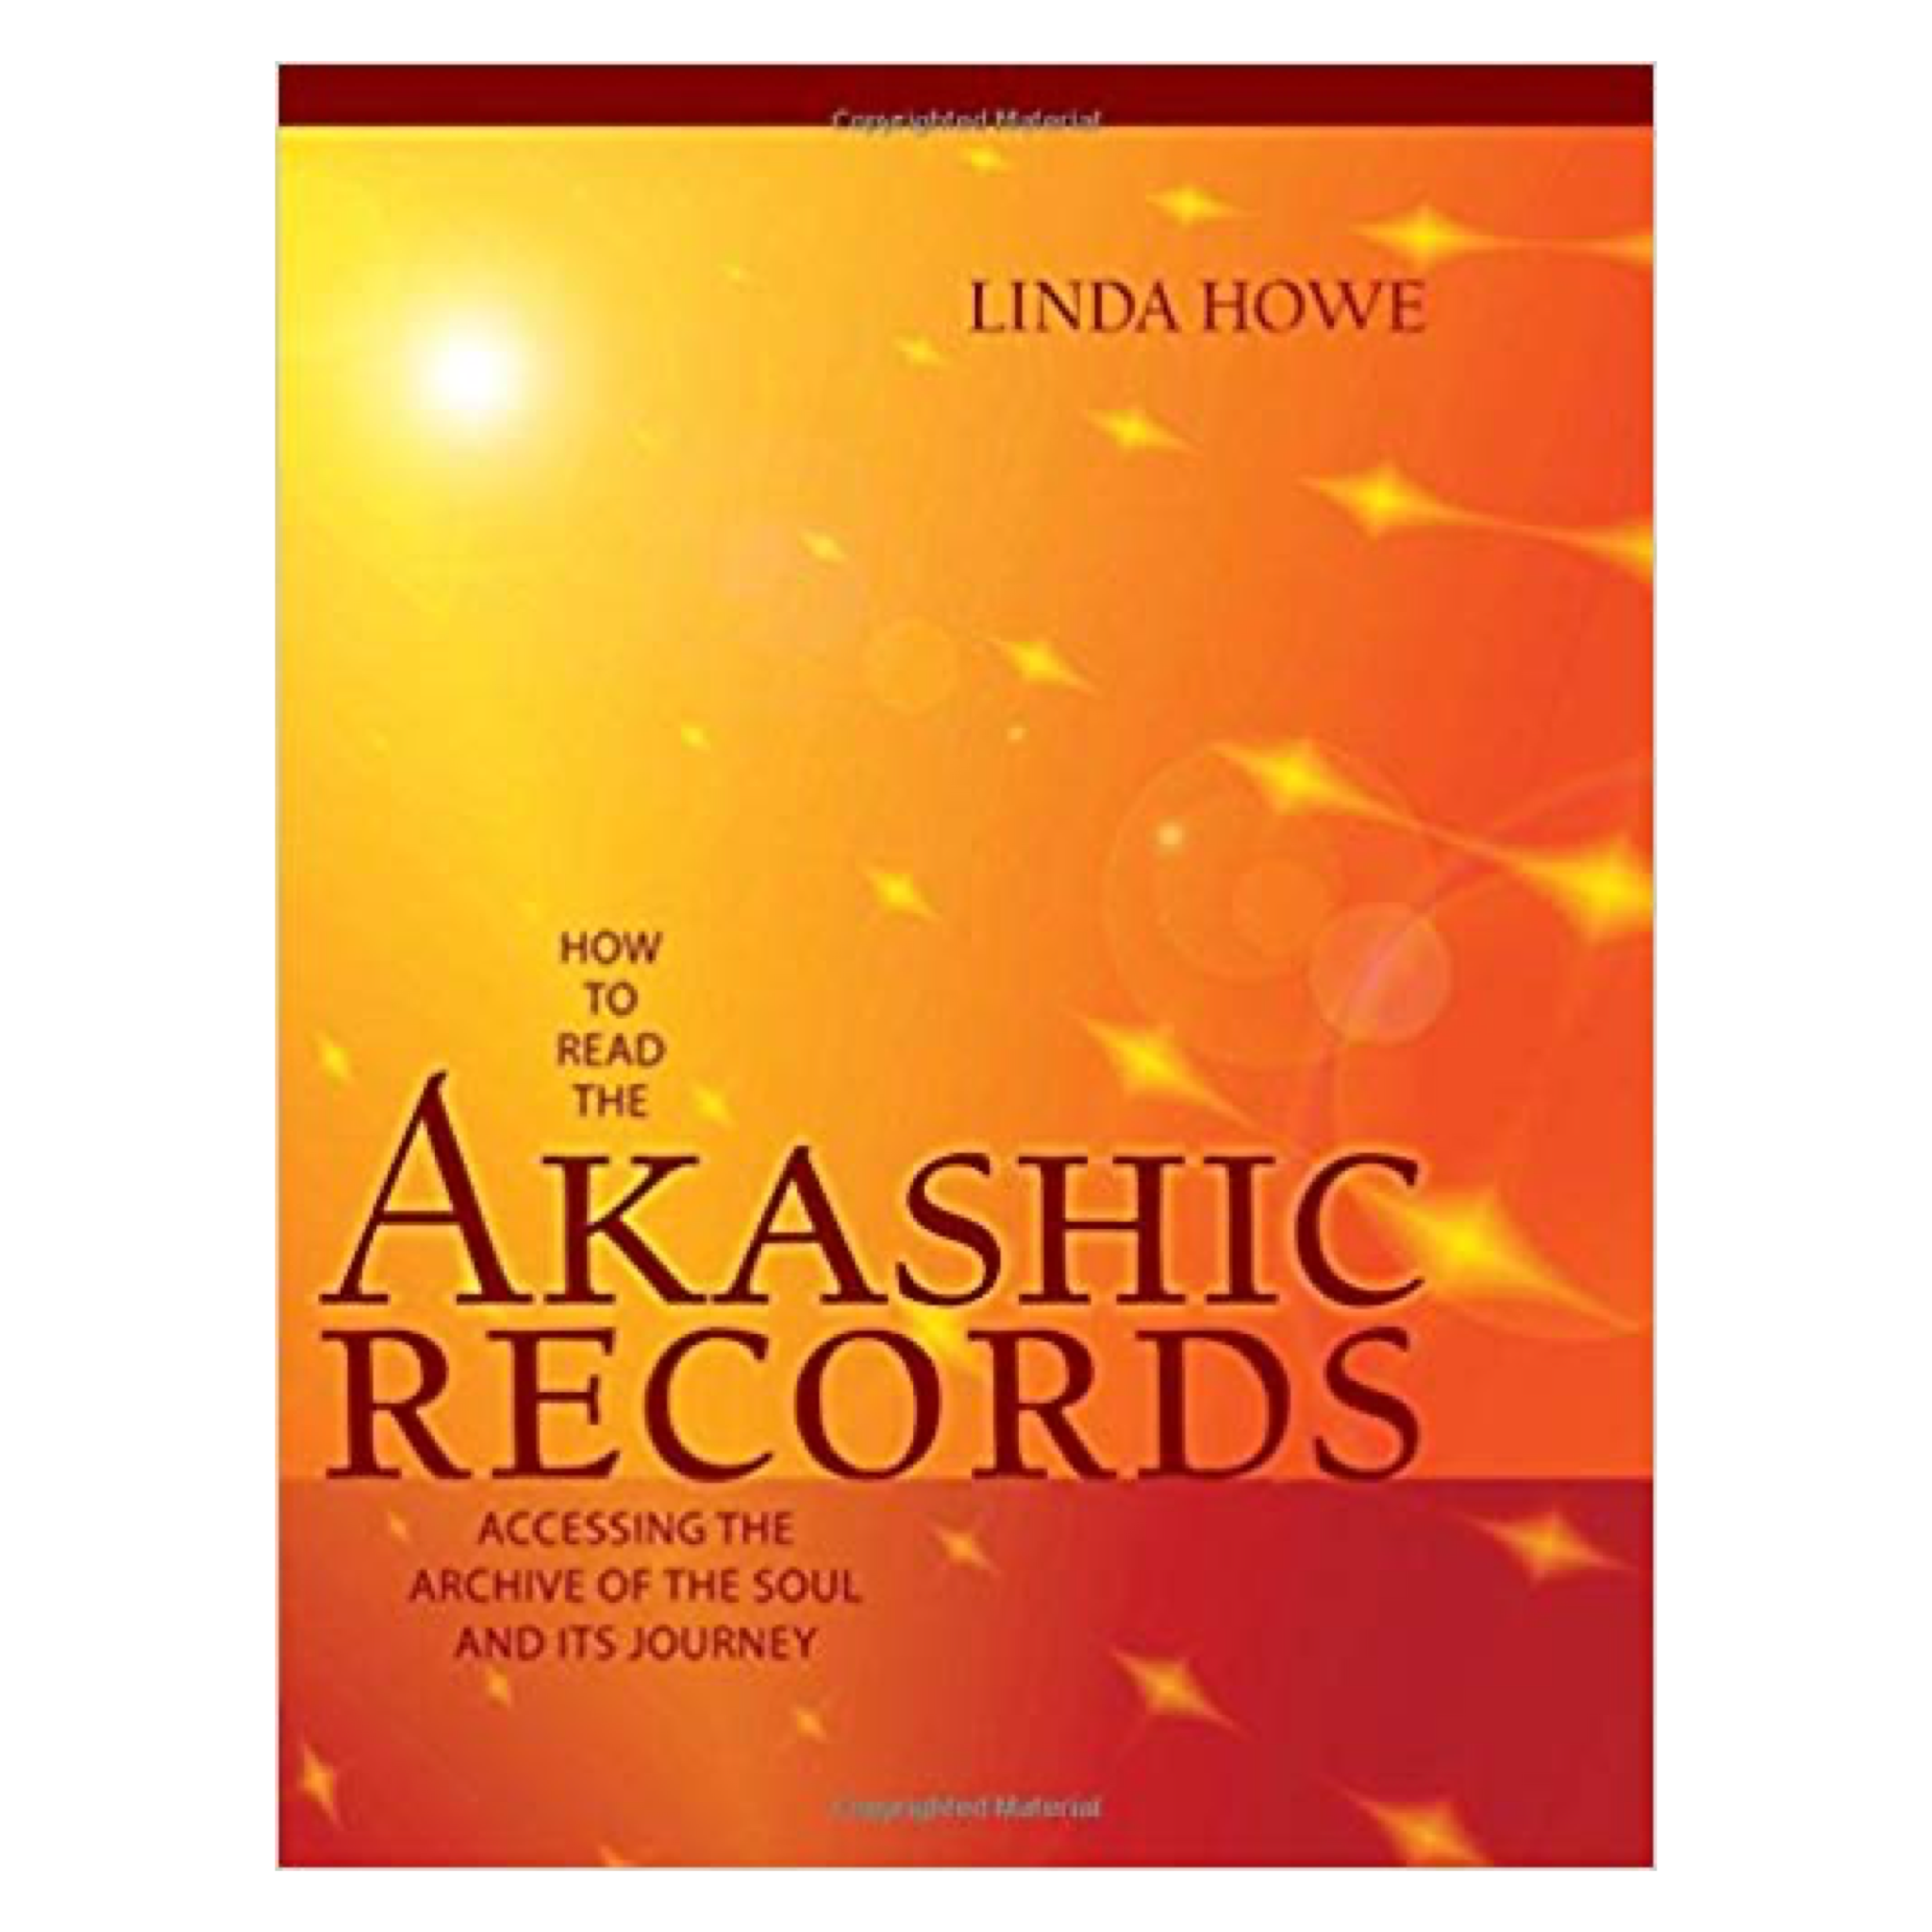 How to Read the Akashic Records by Linda Howie